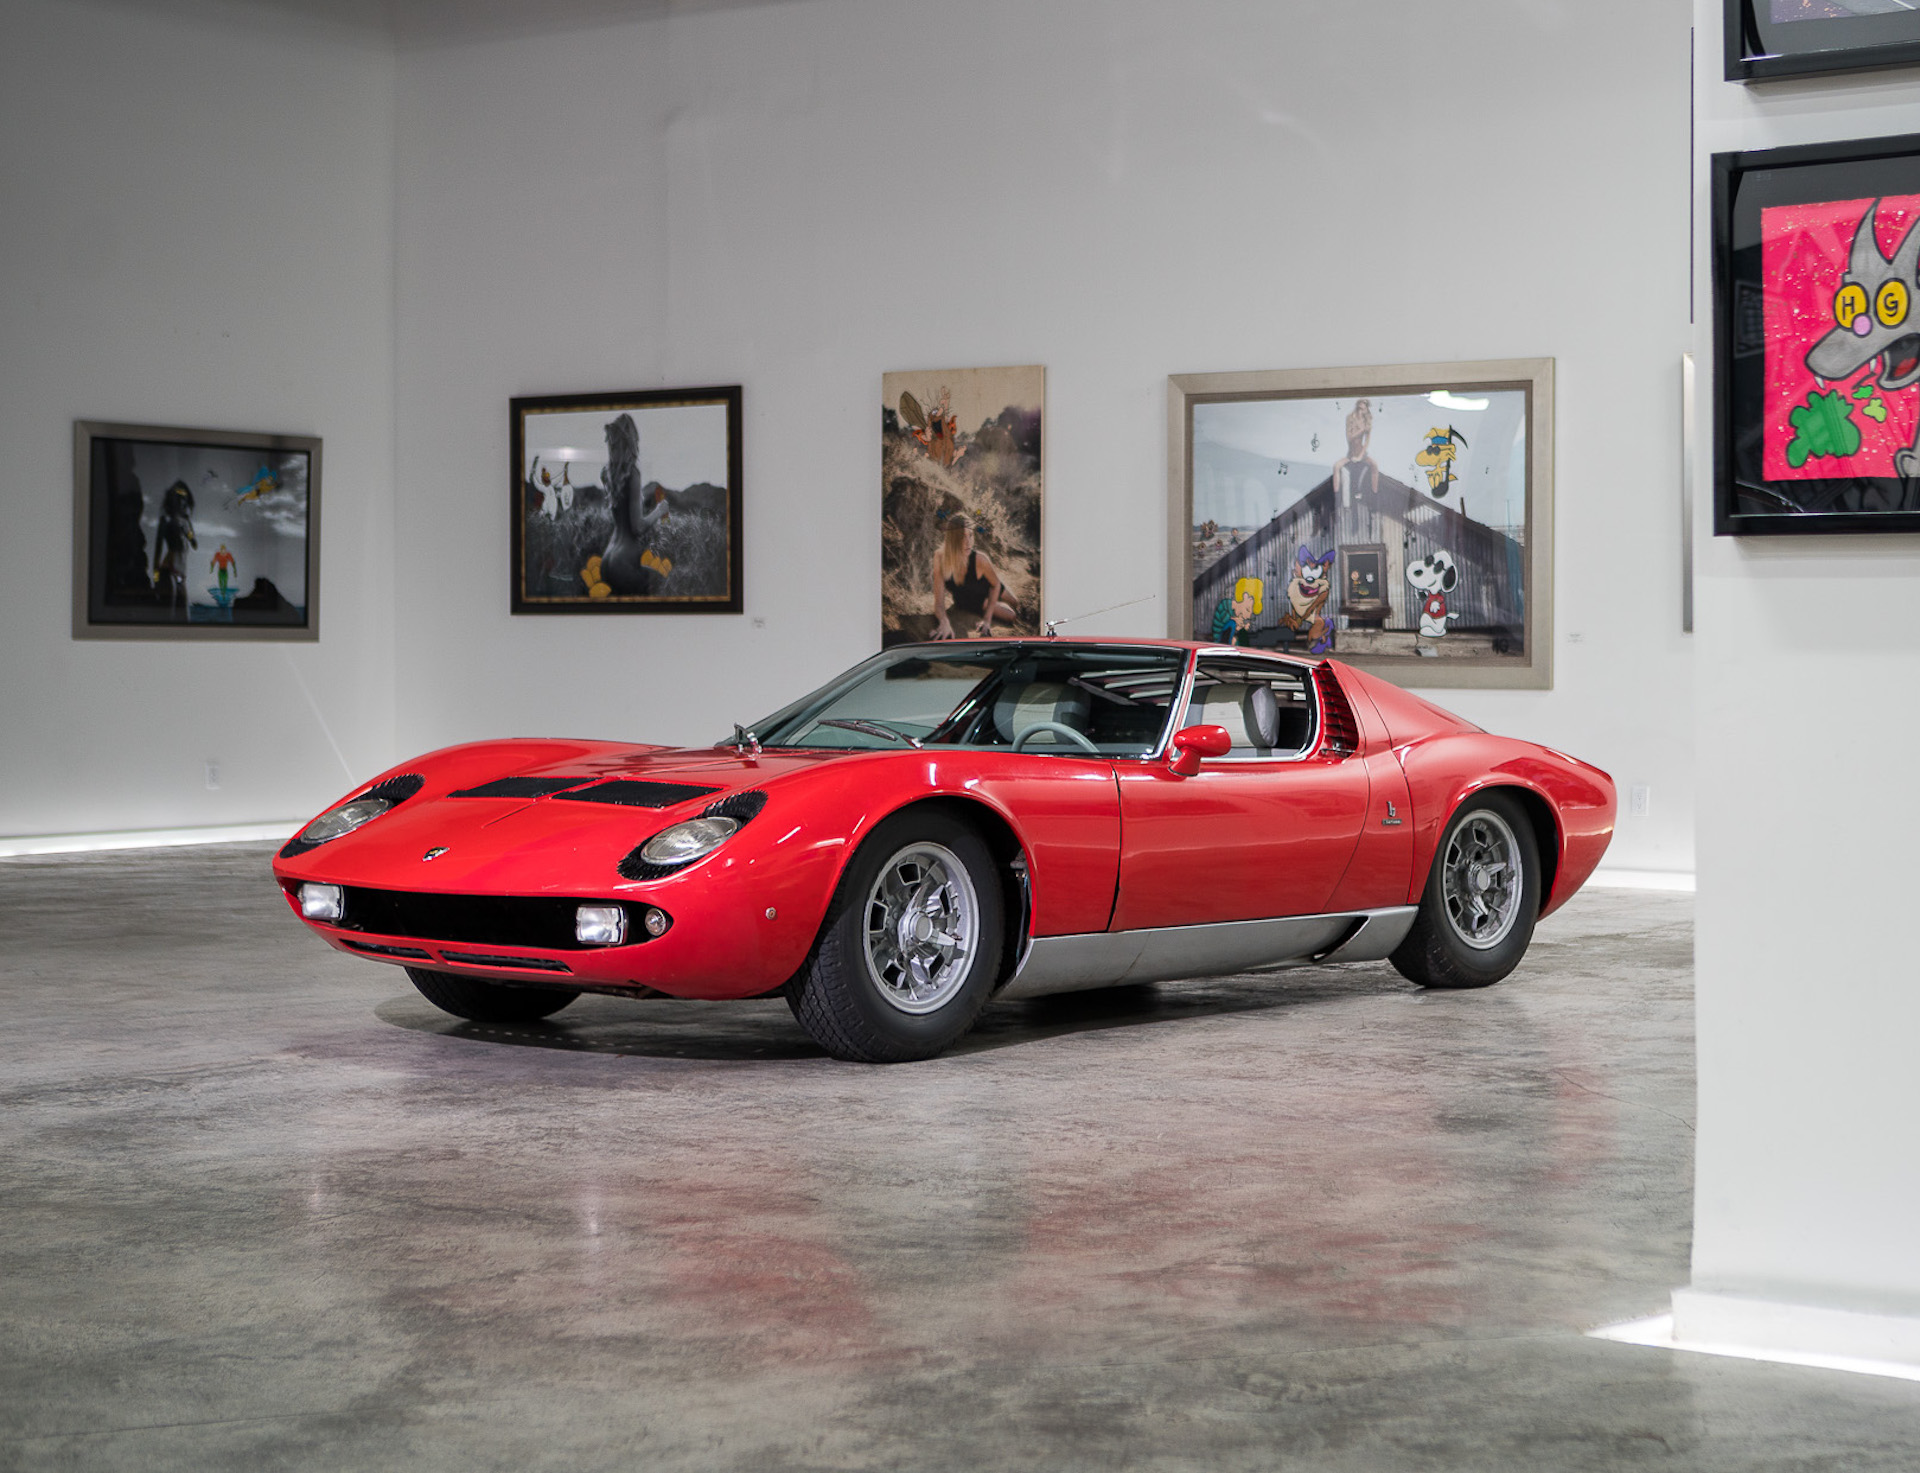 a red lamborghini Miura S parked in a gallery on display